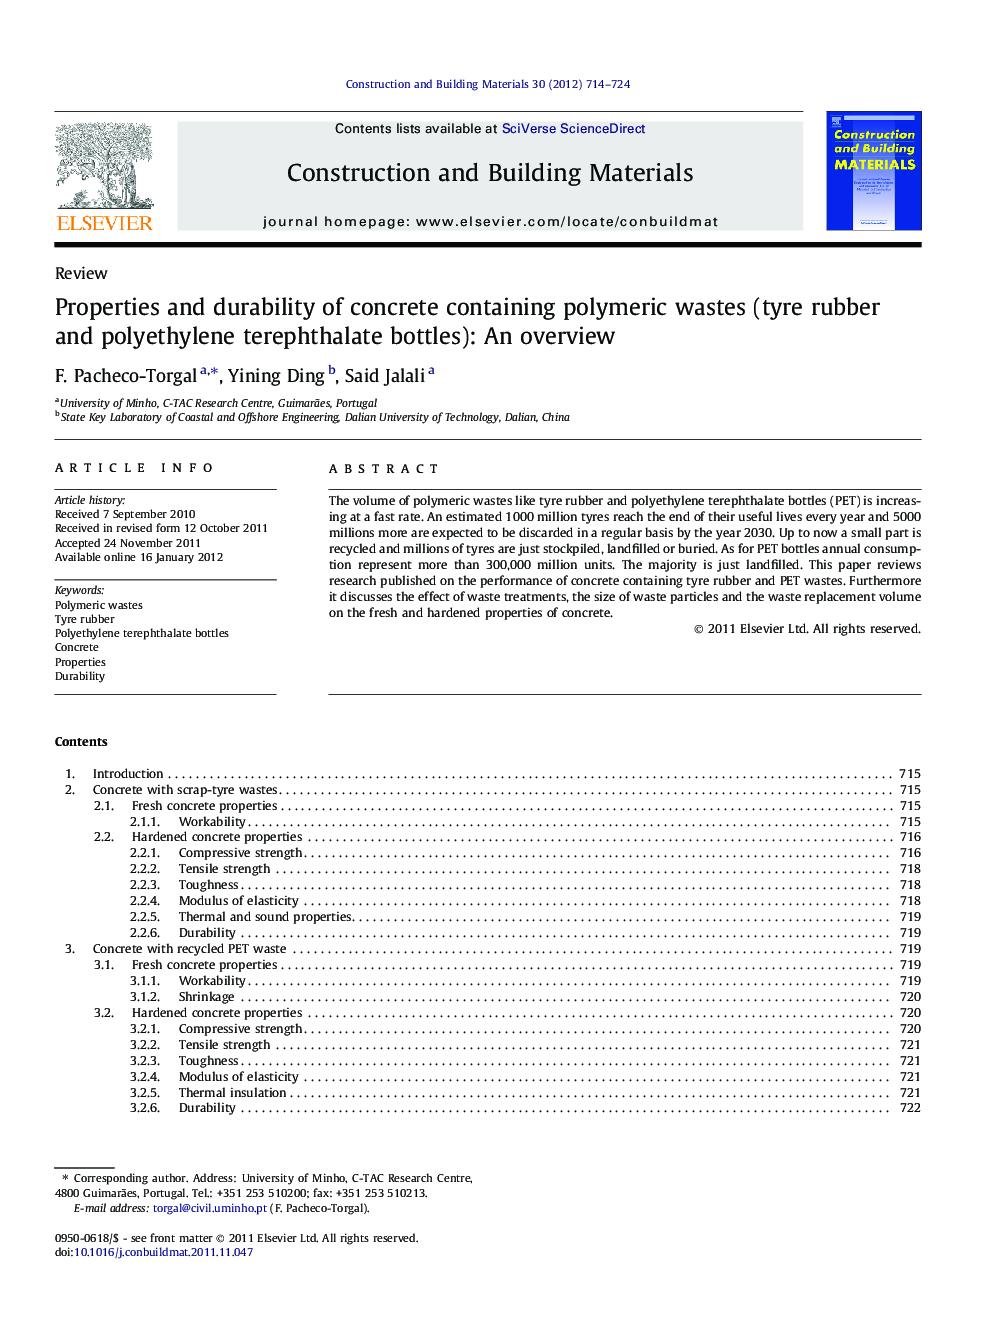 Properties and durability of concrete containing polymeric wastes (tyre rubber and polyethylene terephthalate bottles): An overview